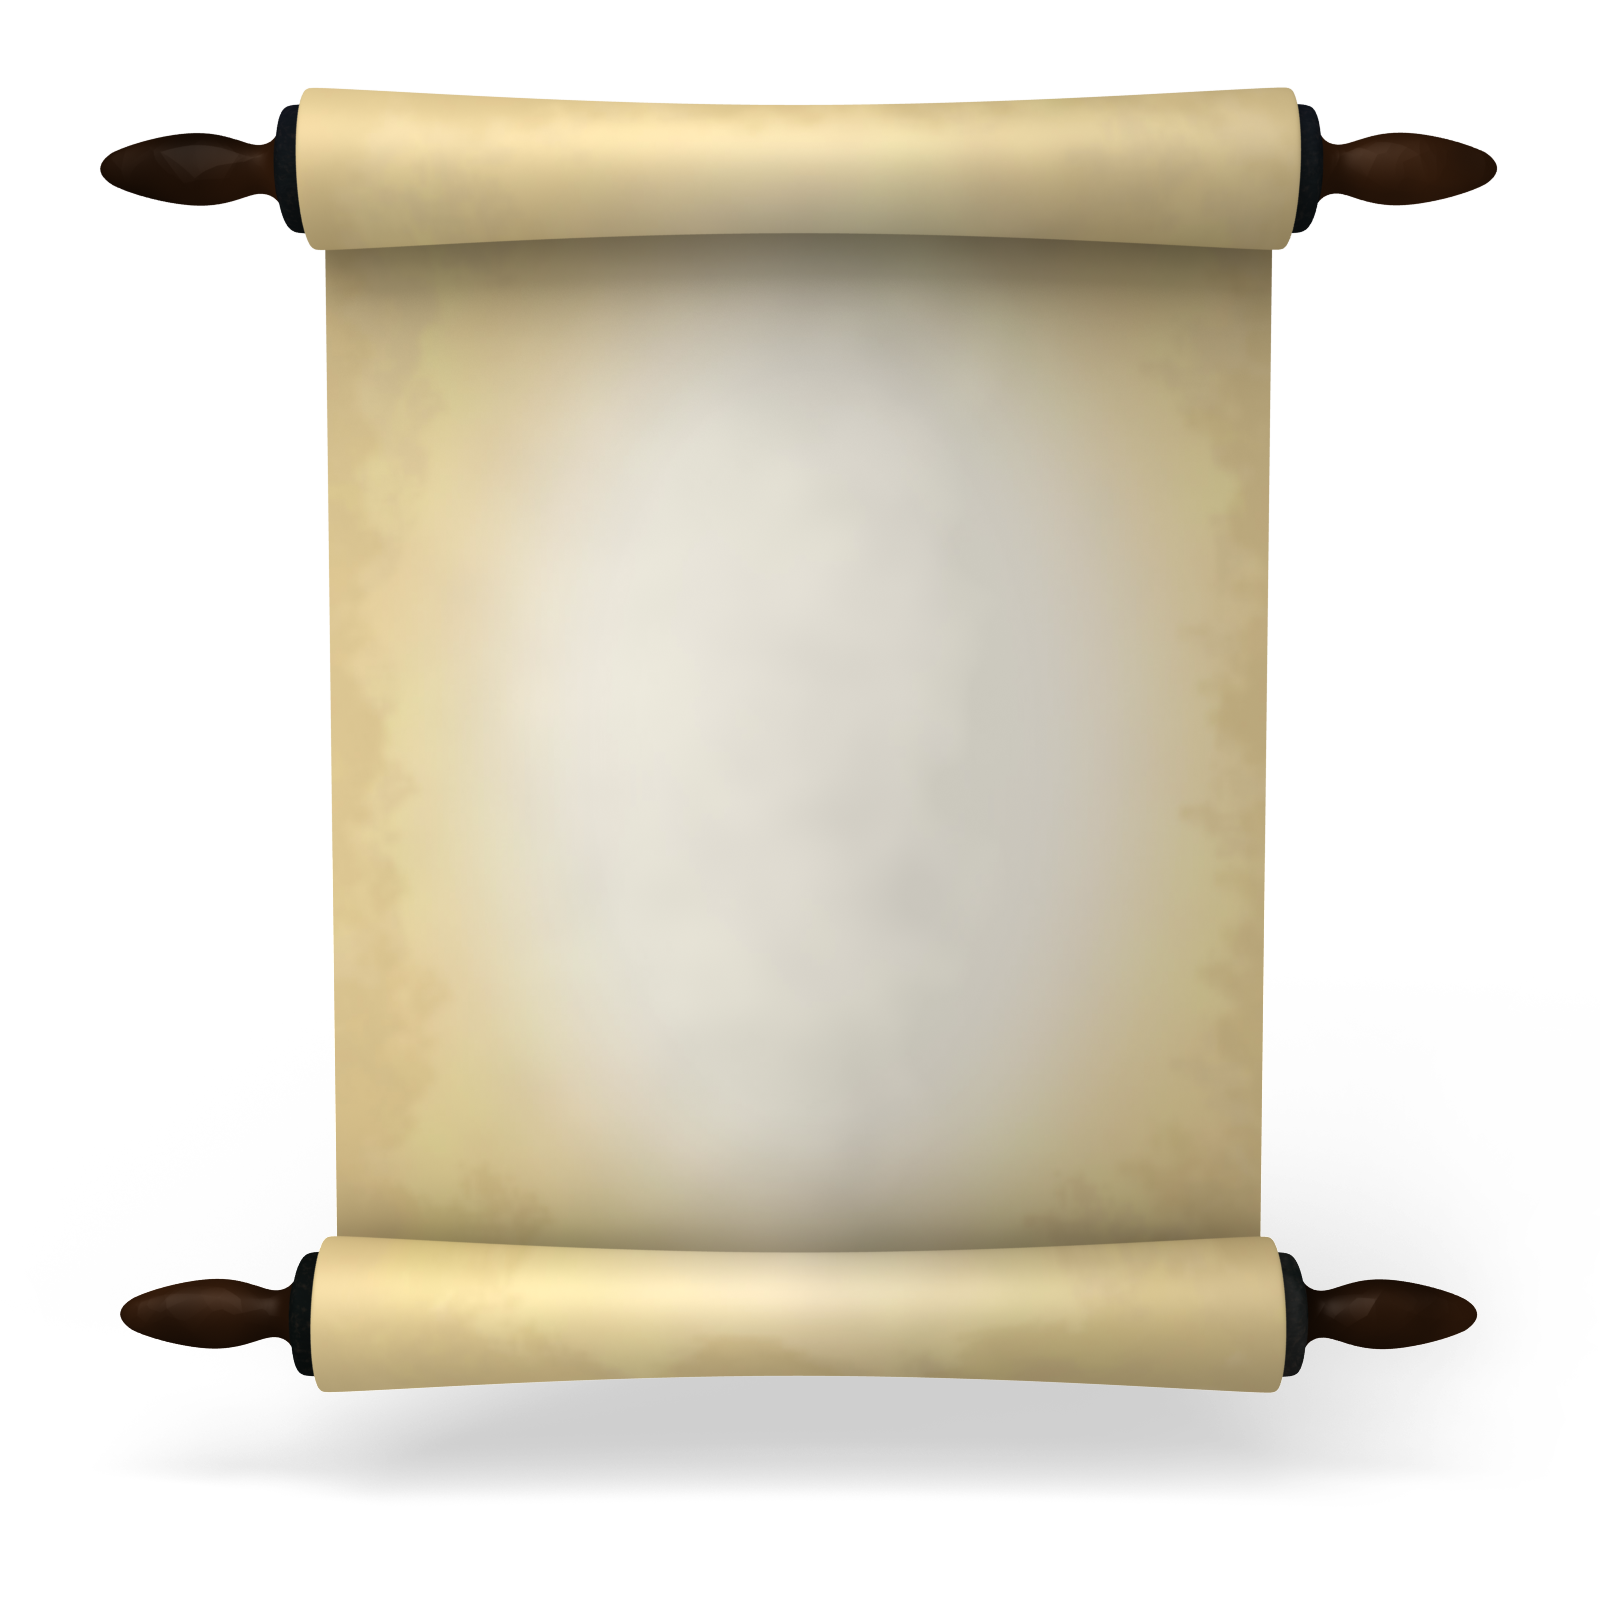 Old Worn Paper2.png